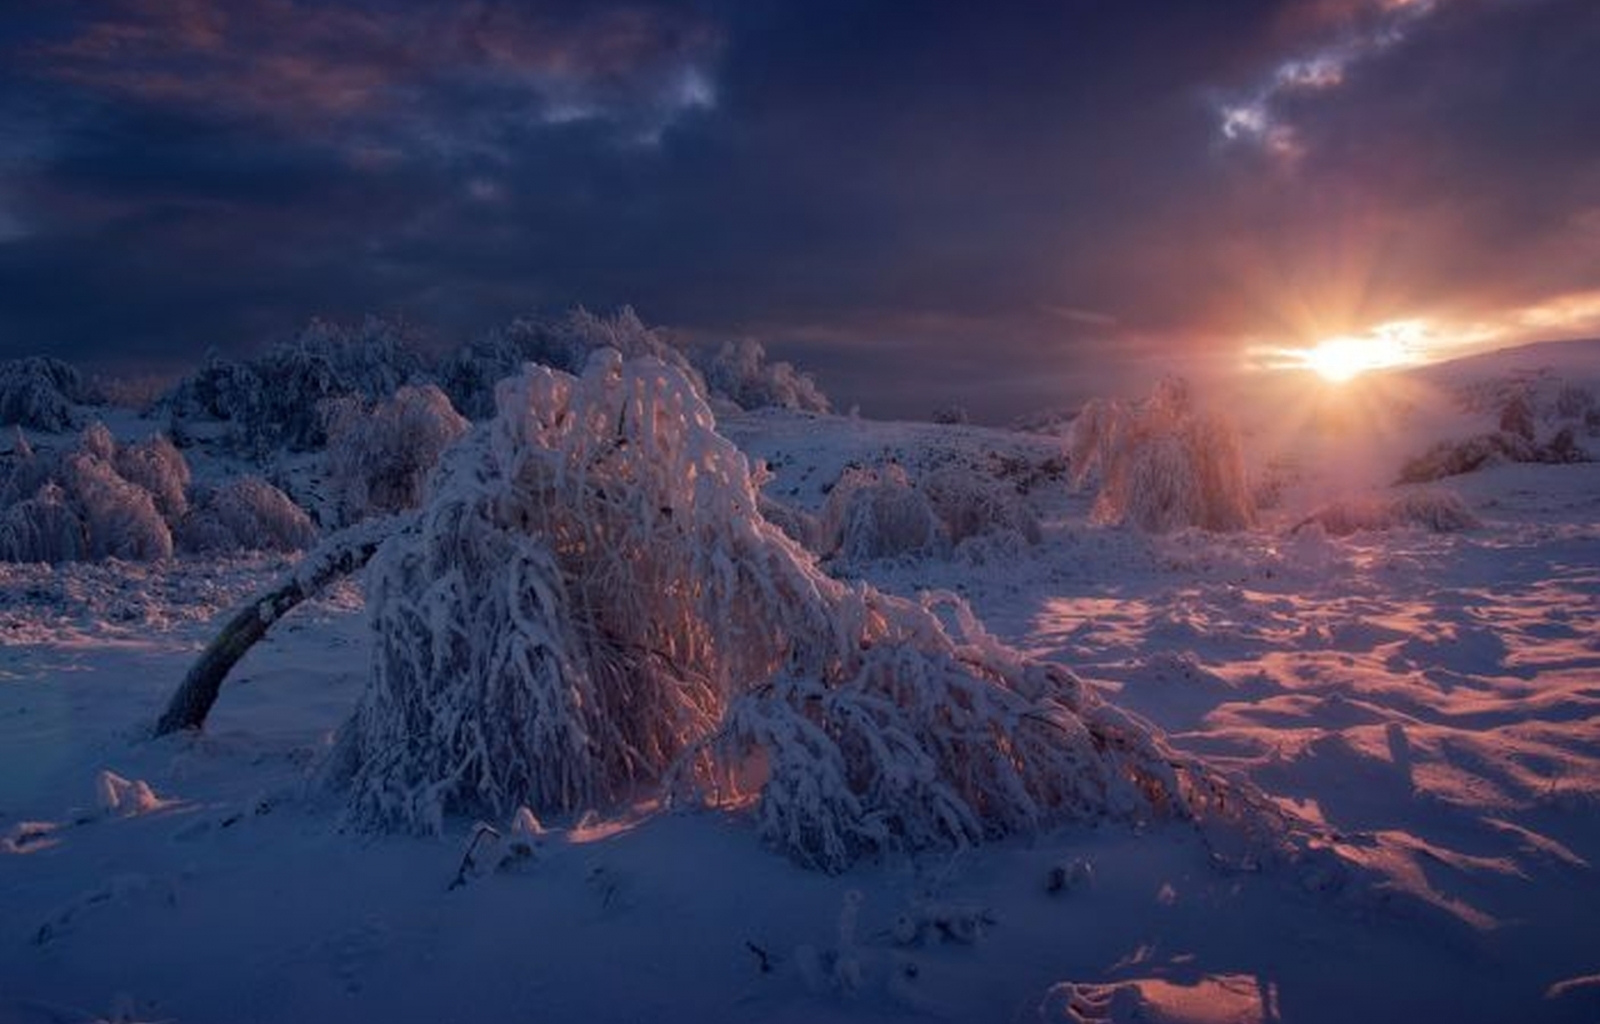 46917 1440x900 PC pictures for free, download snow, blue, landscape, sunset 1440x900 wallpapers on your desktop